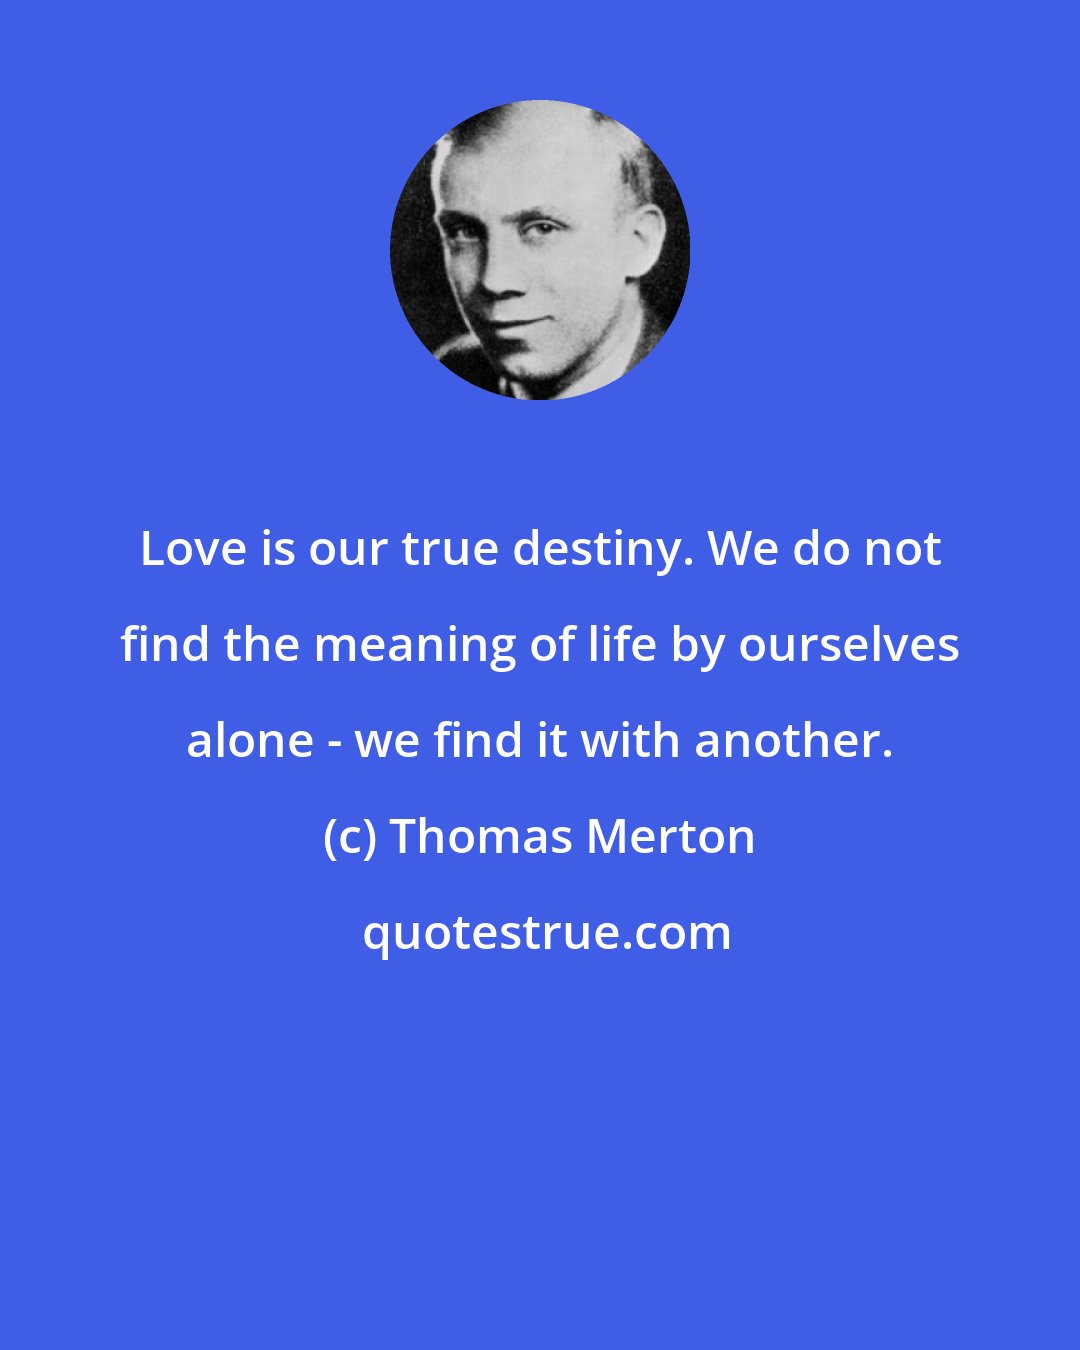 Thomas Merton: Love is our true destiny. We do not find the meaning of life by ourselves alone - we find it with another.